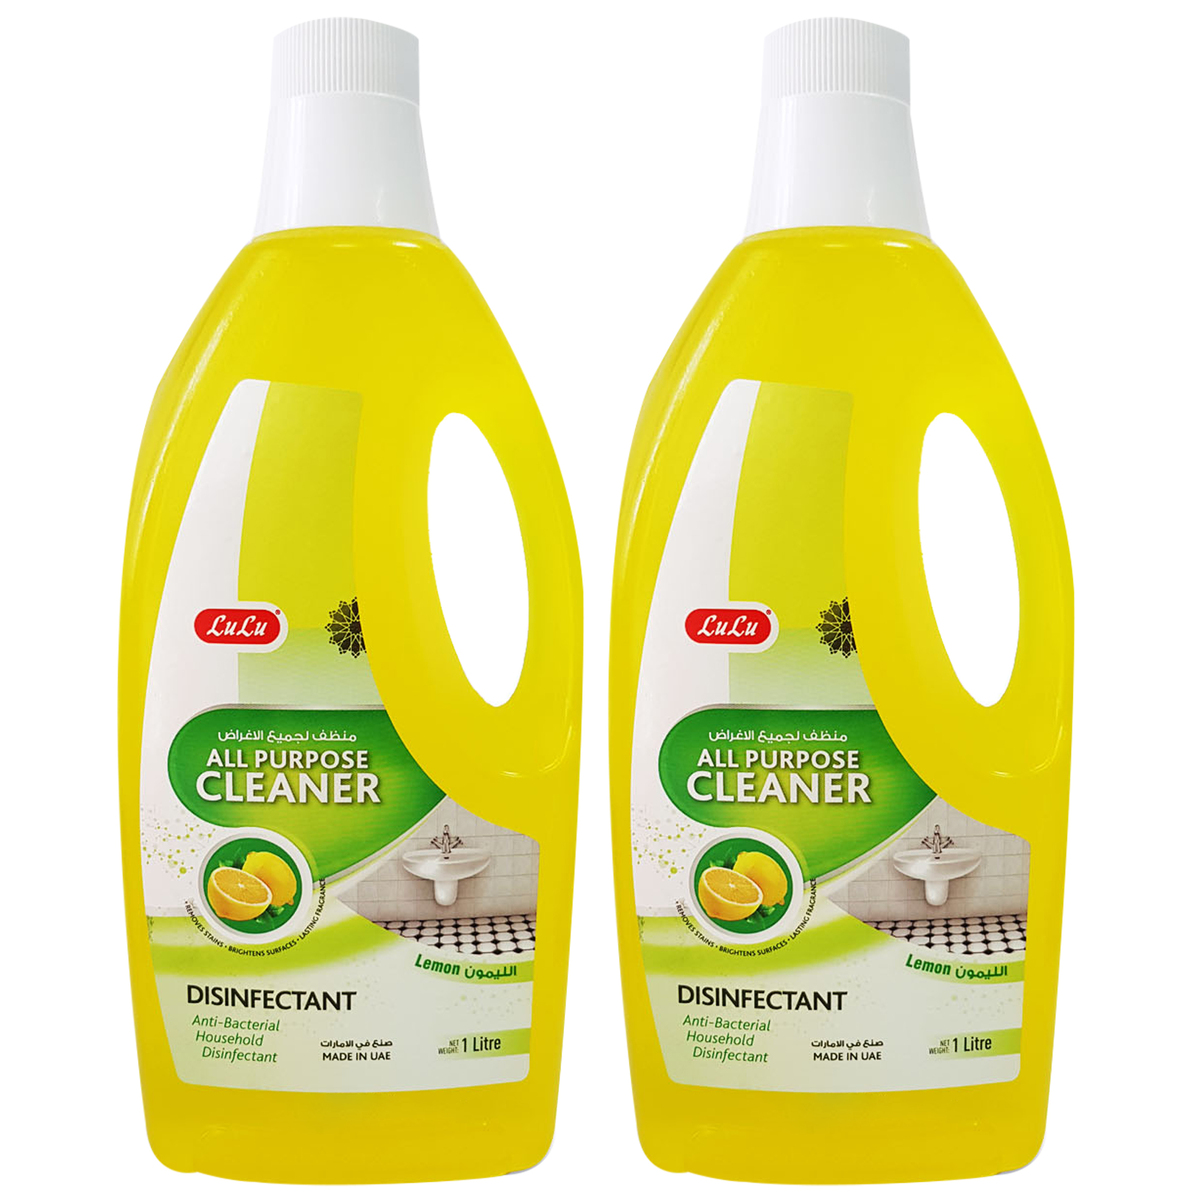 LuLu Disinfectant All Purpose Cleaner Value Pack Assorted 2 x 1Litre